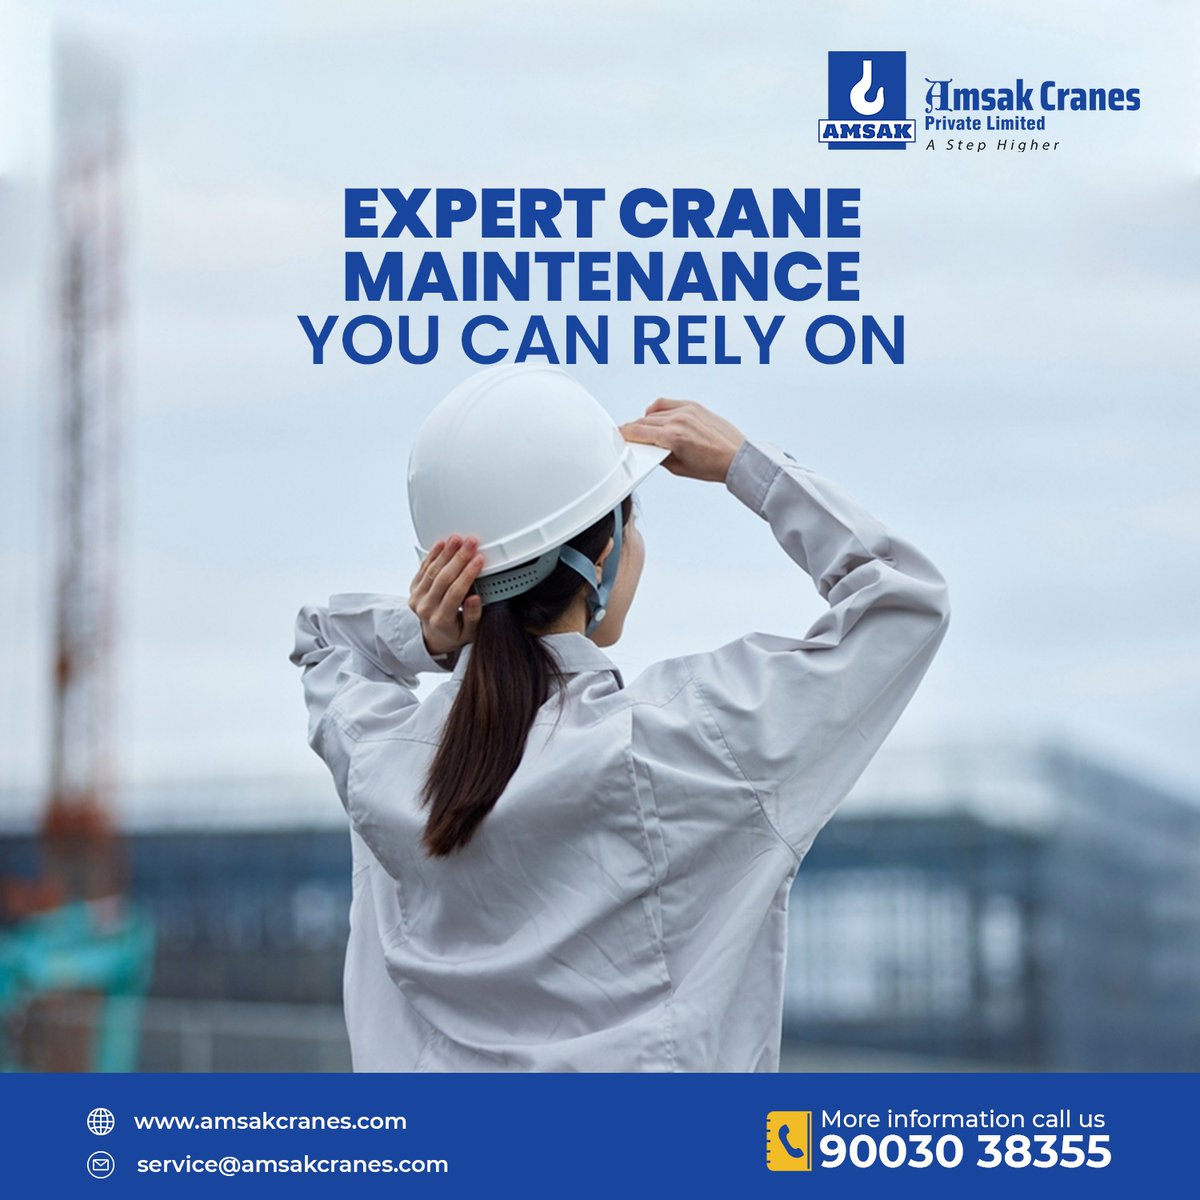 At AMSAK, we deliver expert crane maintenance to ensure peak performance and safety. Trust us for inspections, repairs, and tailored solutions to minimize downtime and maximize efficiency.

#preventativemaintenance #manufacturingprocess #materialhandlingequipment #cranehire #eot